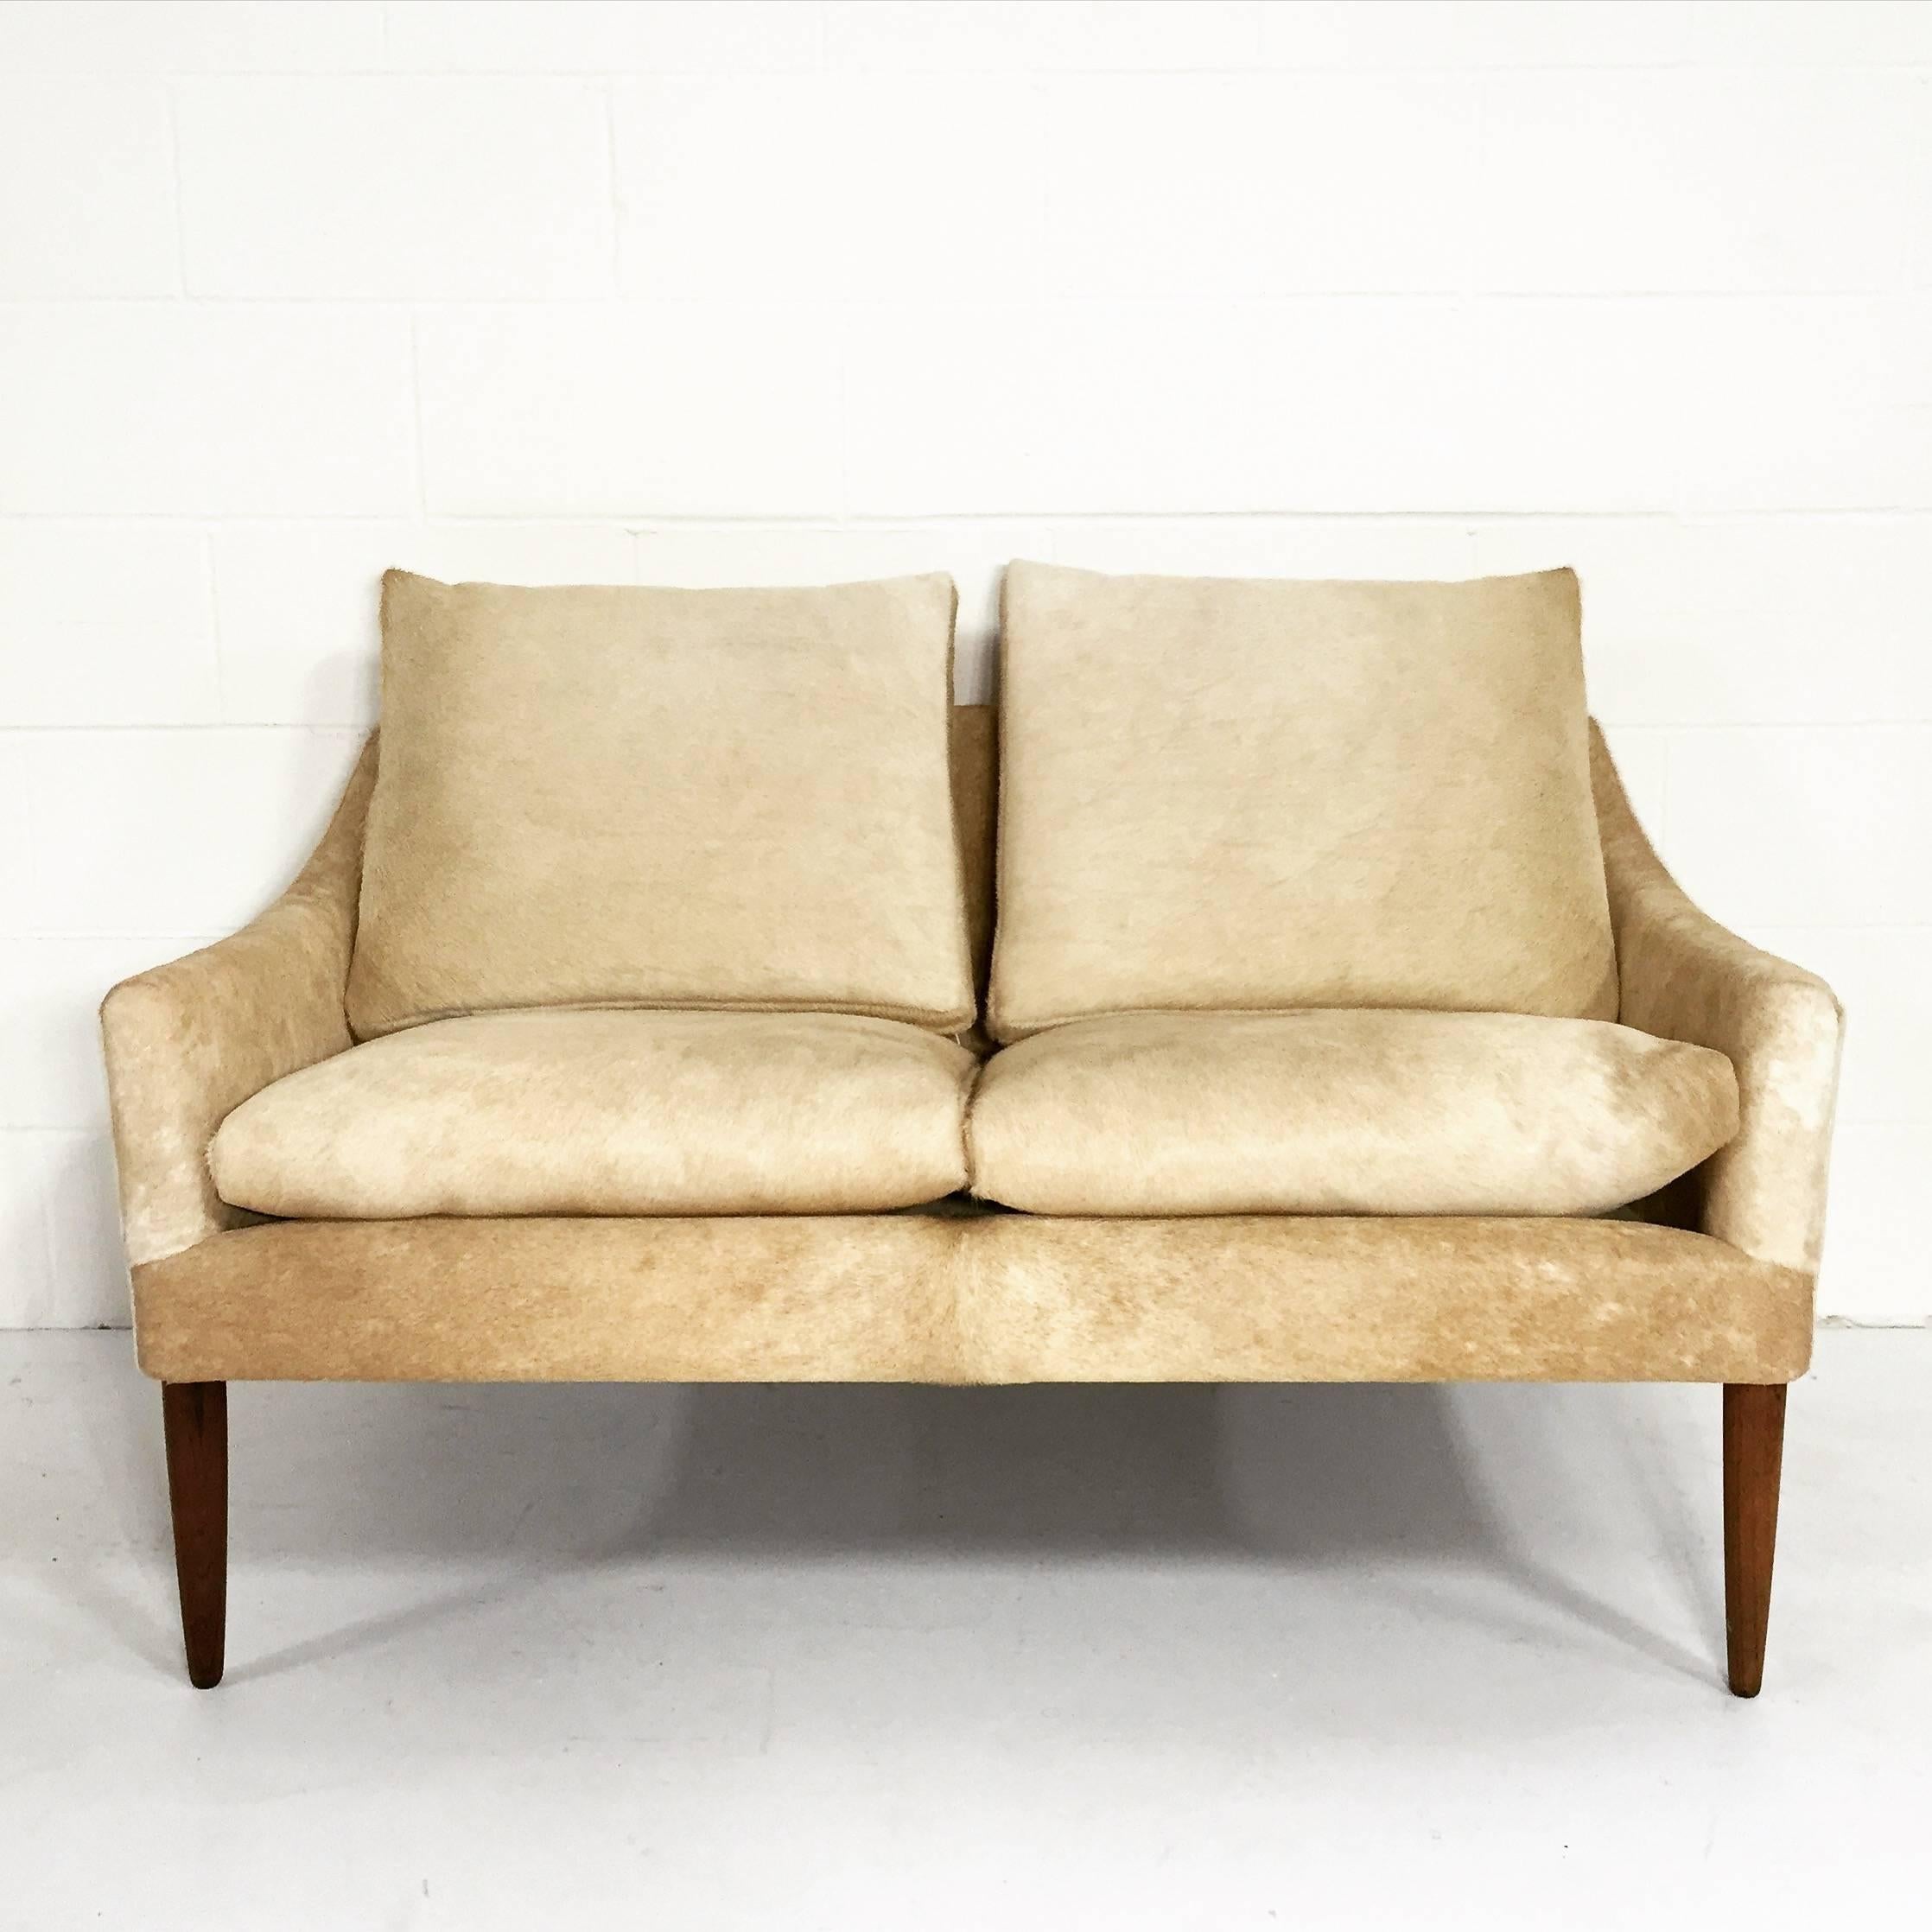 You have to admire every graceful line of this Danish design. We adore this piece! It’s a mastery of upholstery. We chose the silkiest palomino cowhides and they couldn’t be more perfect. This is destined for an amazing home.

Pair available.